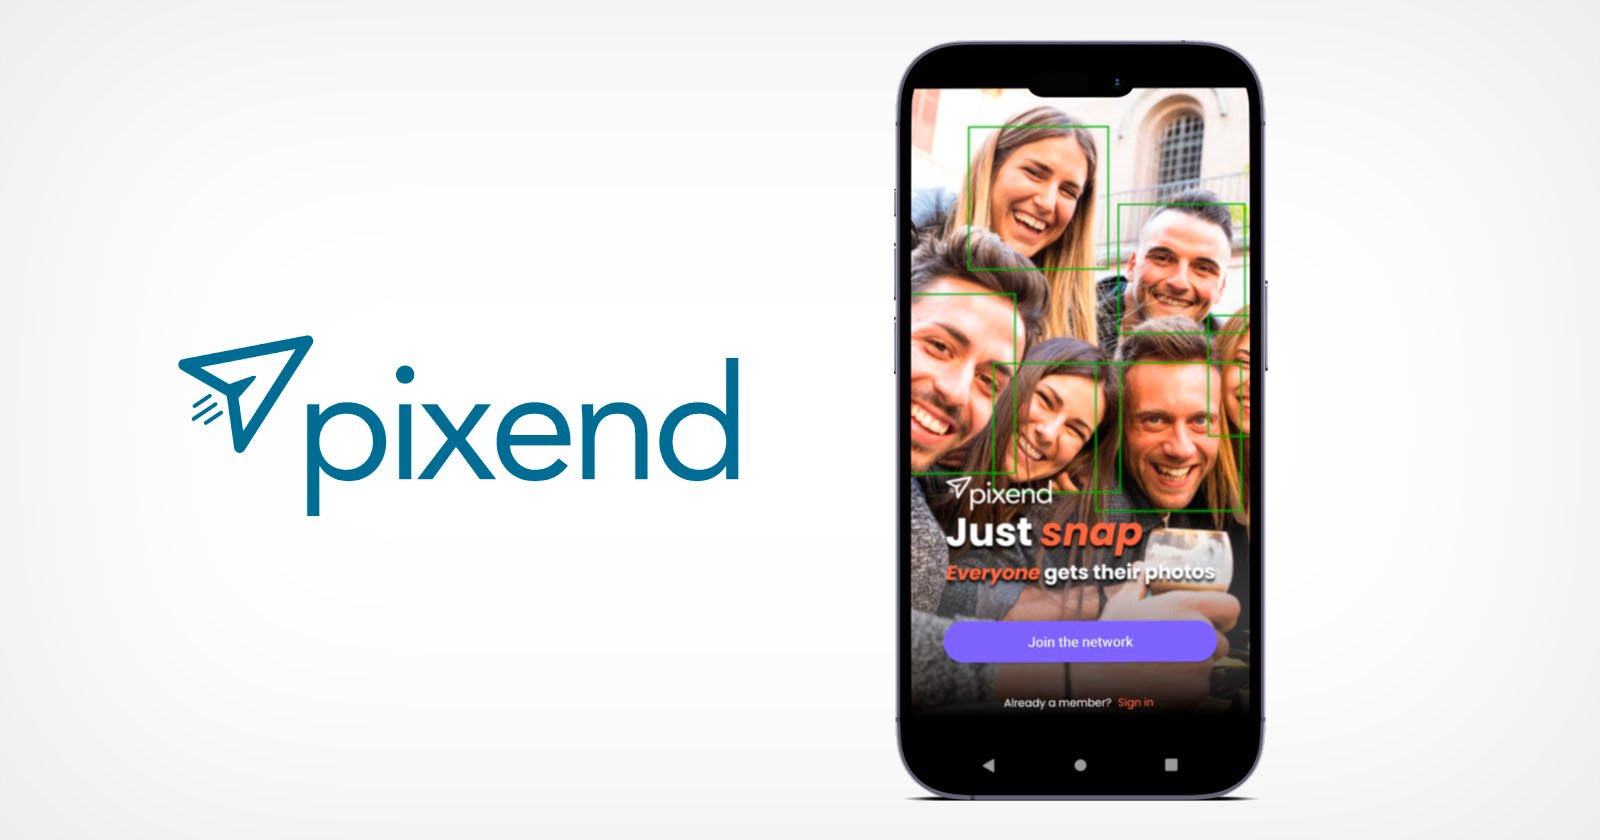 Pixend Uses Facial Recognition to Send Photos to the Right People Automatically